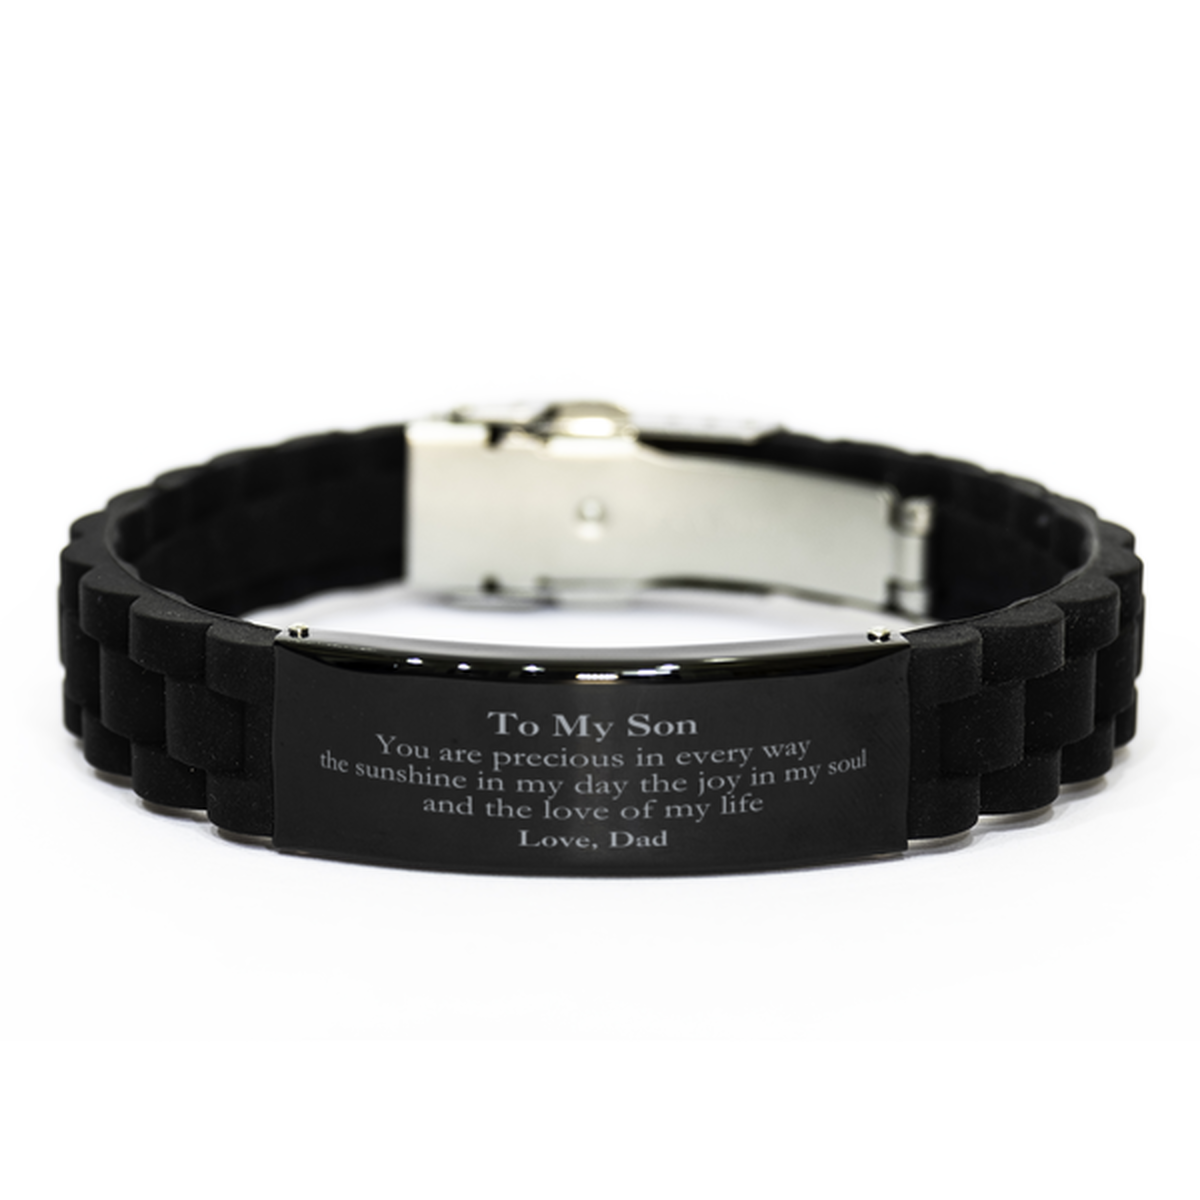 Graduation Gifts for Son Black Glidelock Clasp Bracelet Present from Dad, Christmas Son Birthday Gifts Son You are precious in every way the sunshine in my day. Love, Dad